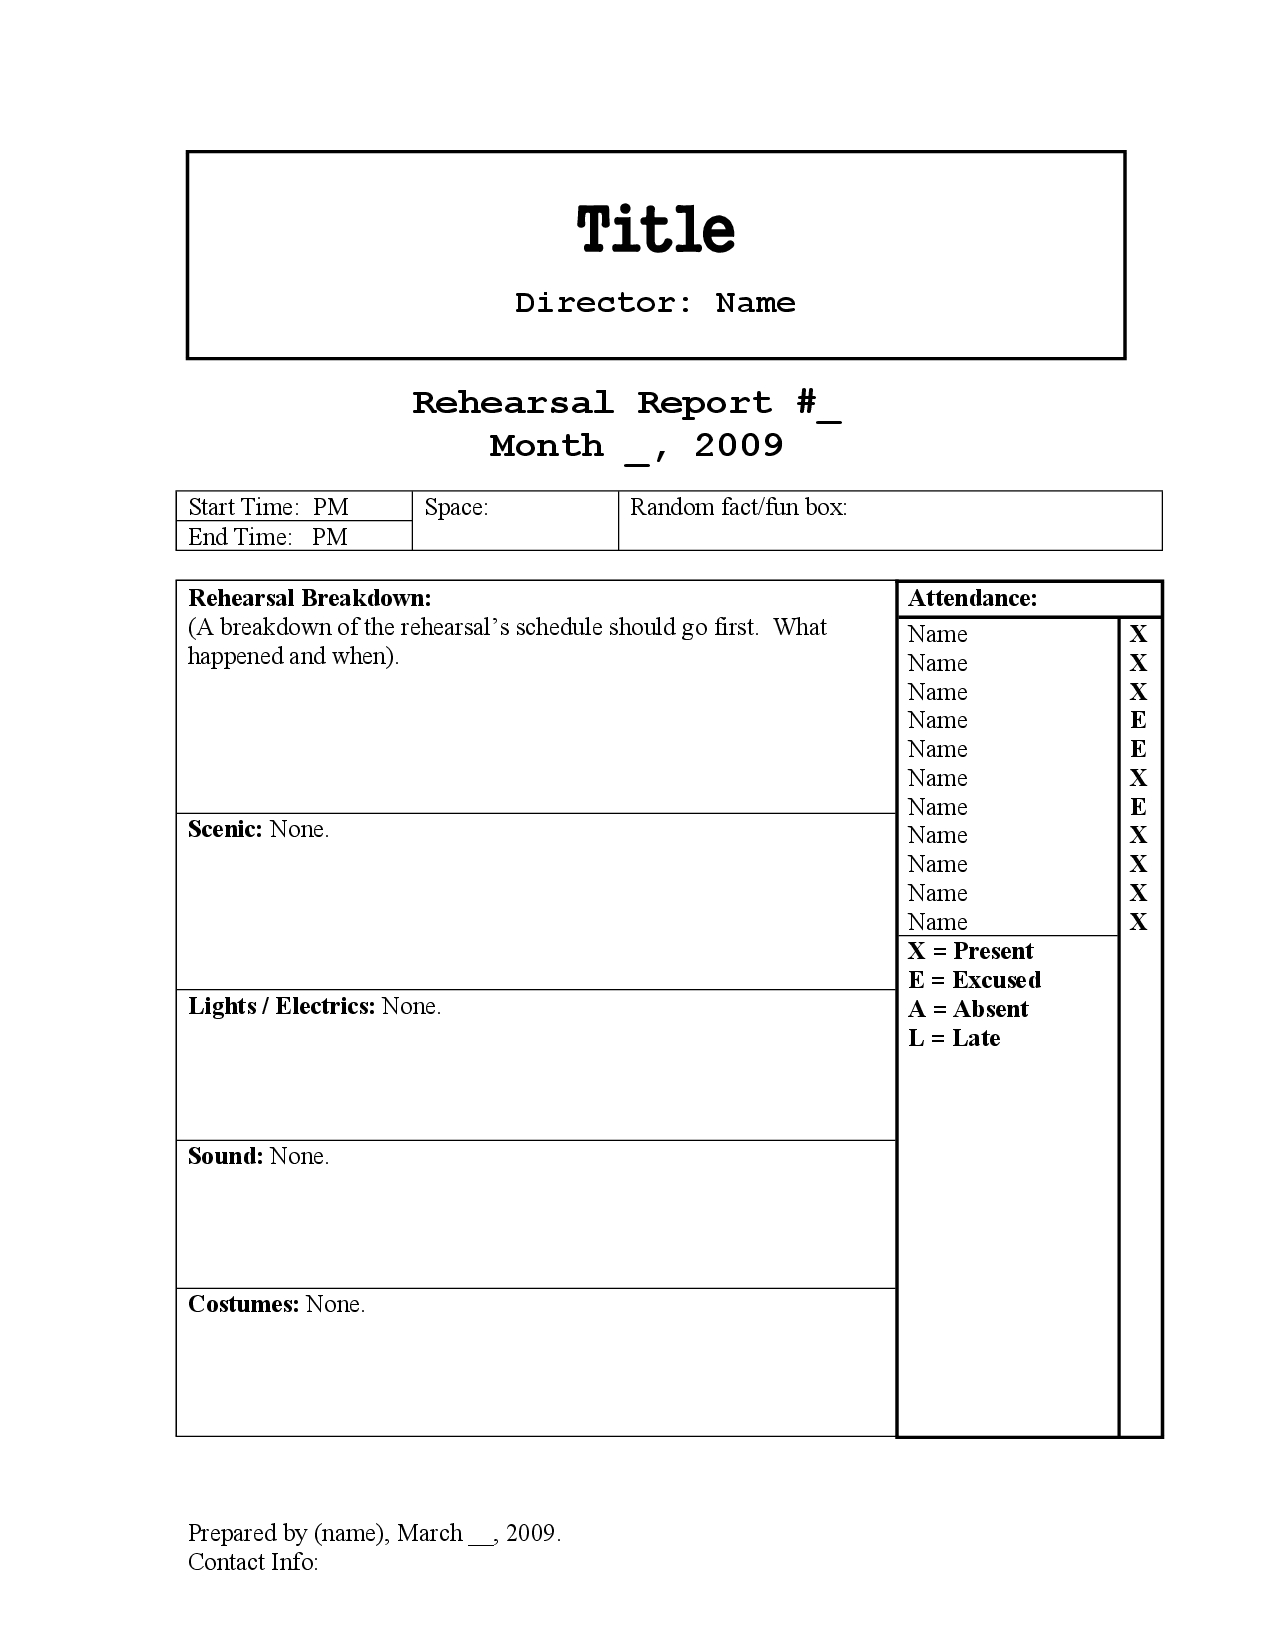 Rehearsal Report Template | Stage Manager In 2019 | Project Within Rehearsal Report Template